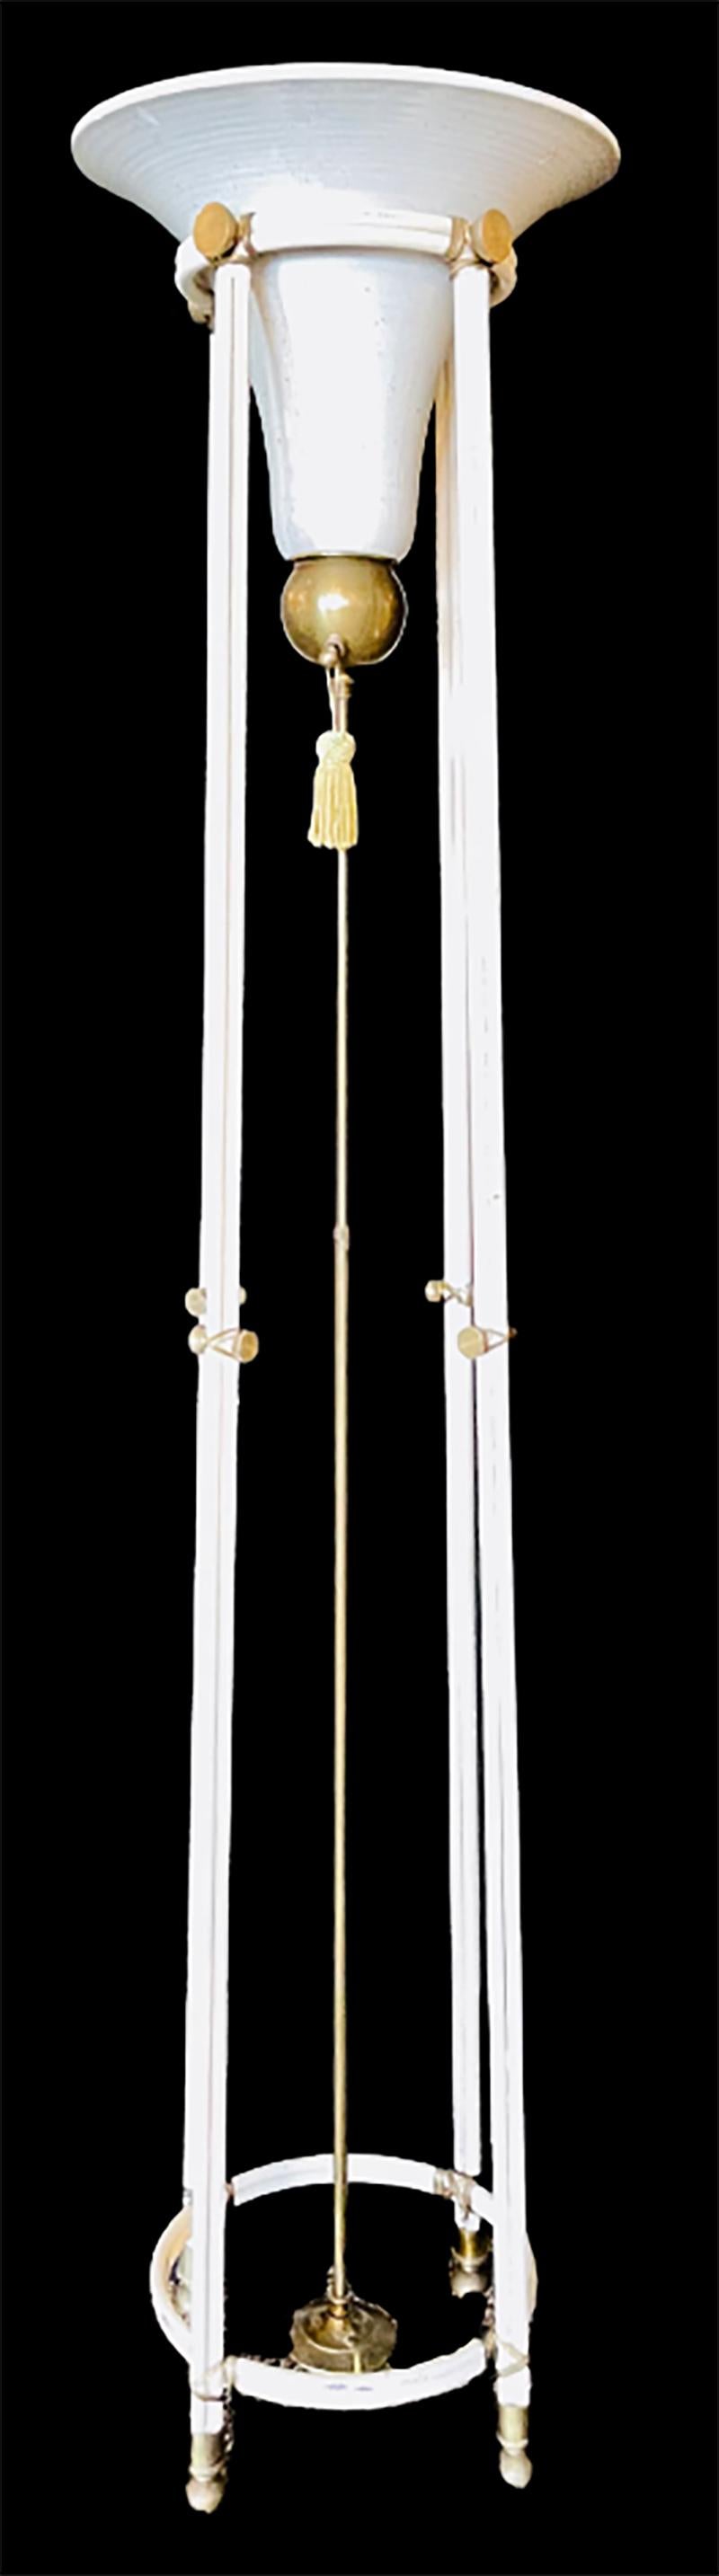 French Mid-Century Modern, Torchiere Floor Lamps, White Porcelain, Bronze, France 1930s For Sale